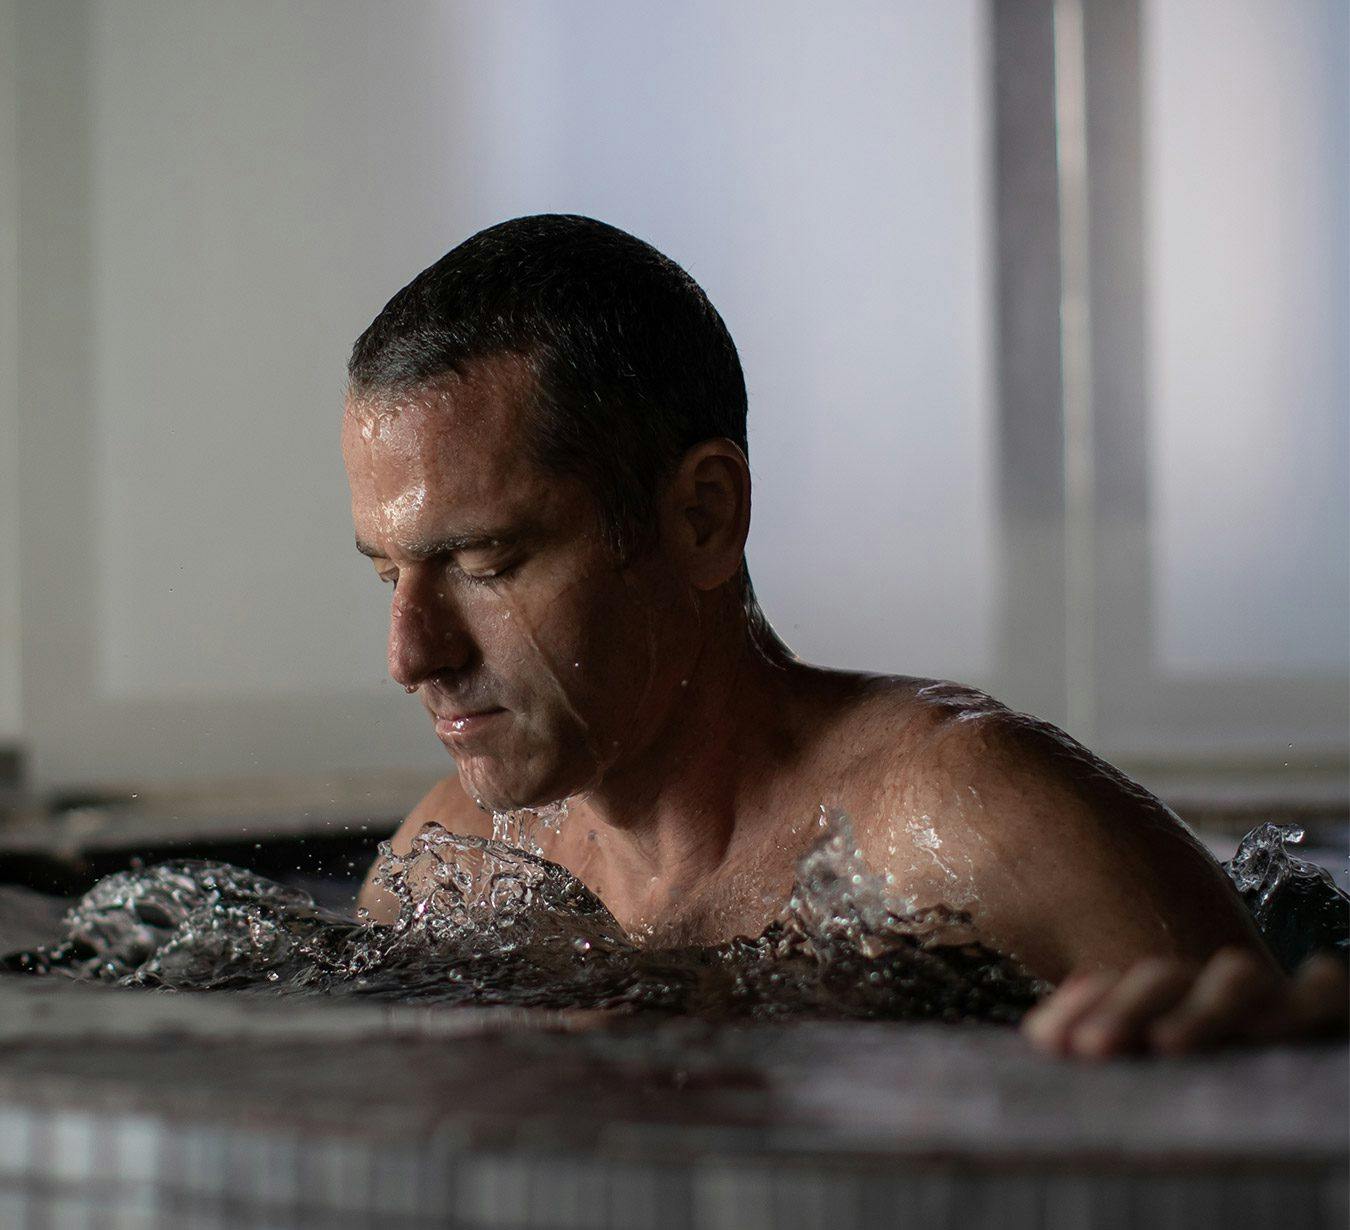 Scandinave spa hydrotherapy guide Scott Simons manages his breath and stays in the present moment when he immerses his entire body in the cold plunge pool.